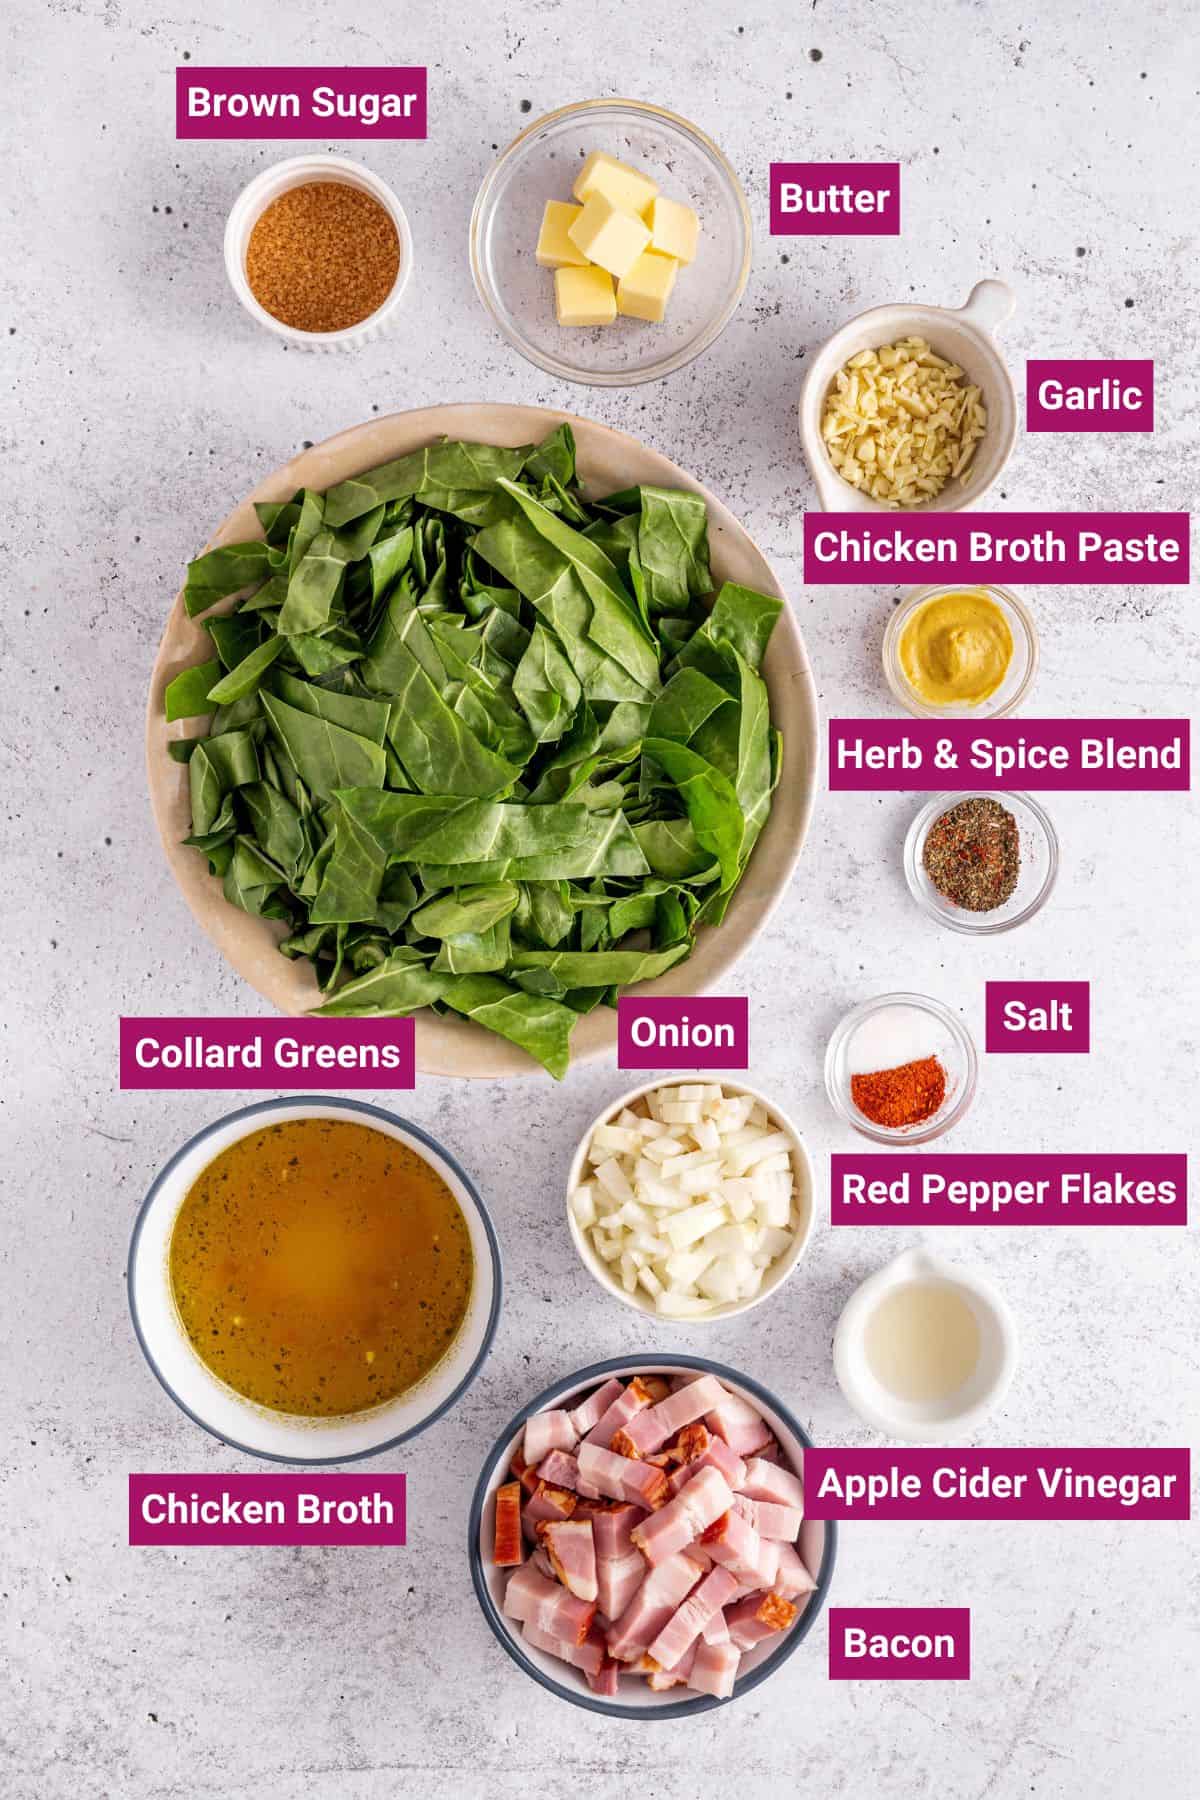 ingredients to make southern collard greens with bacon: brown sugar, butter, garlic, chicken broth paste, herb & spice blend, salt, red pepper flakes, collard greens, chicken broth, bacon, apple cider vinegar on separate bowls